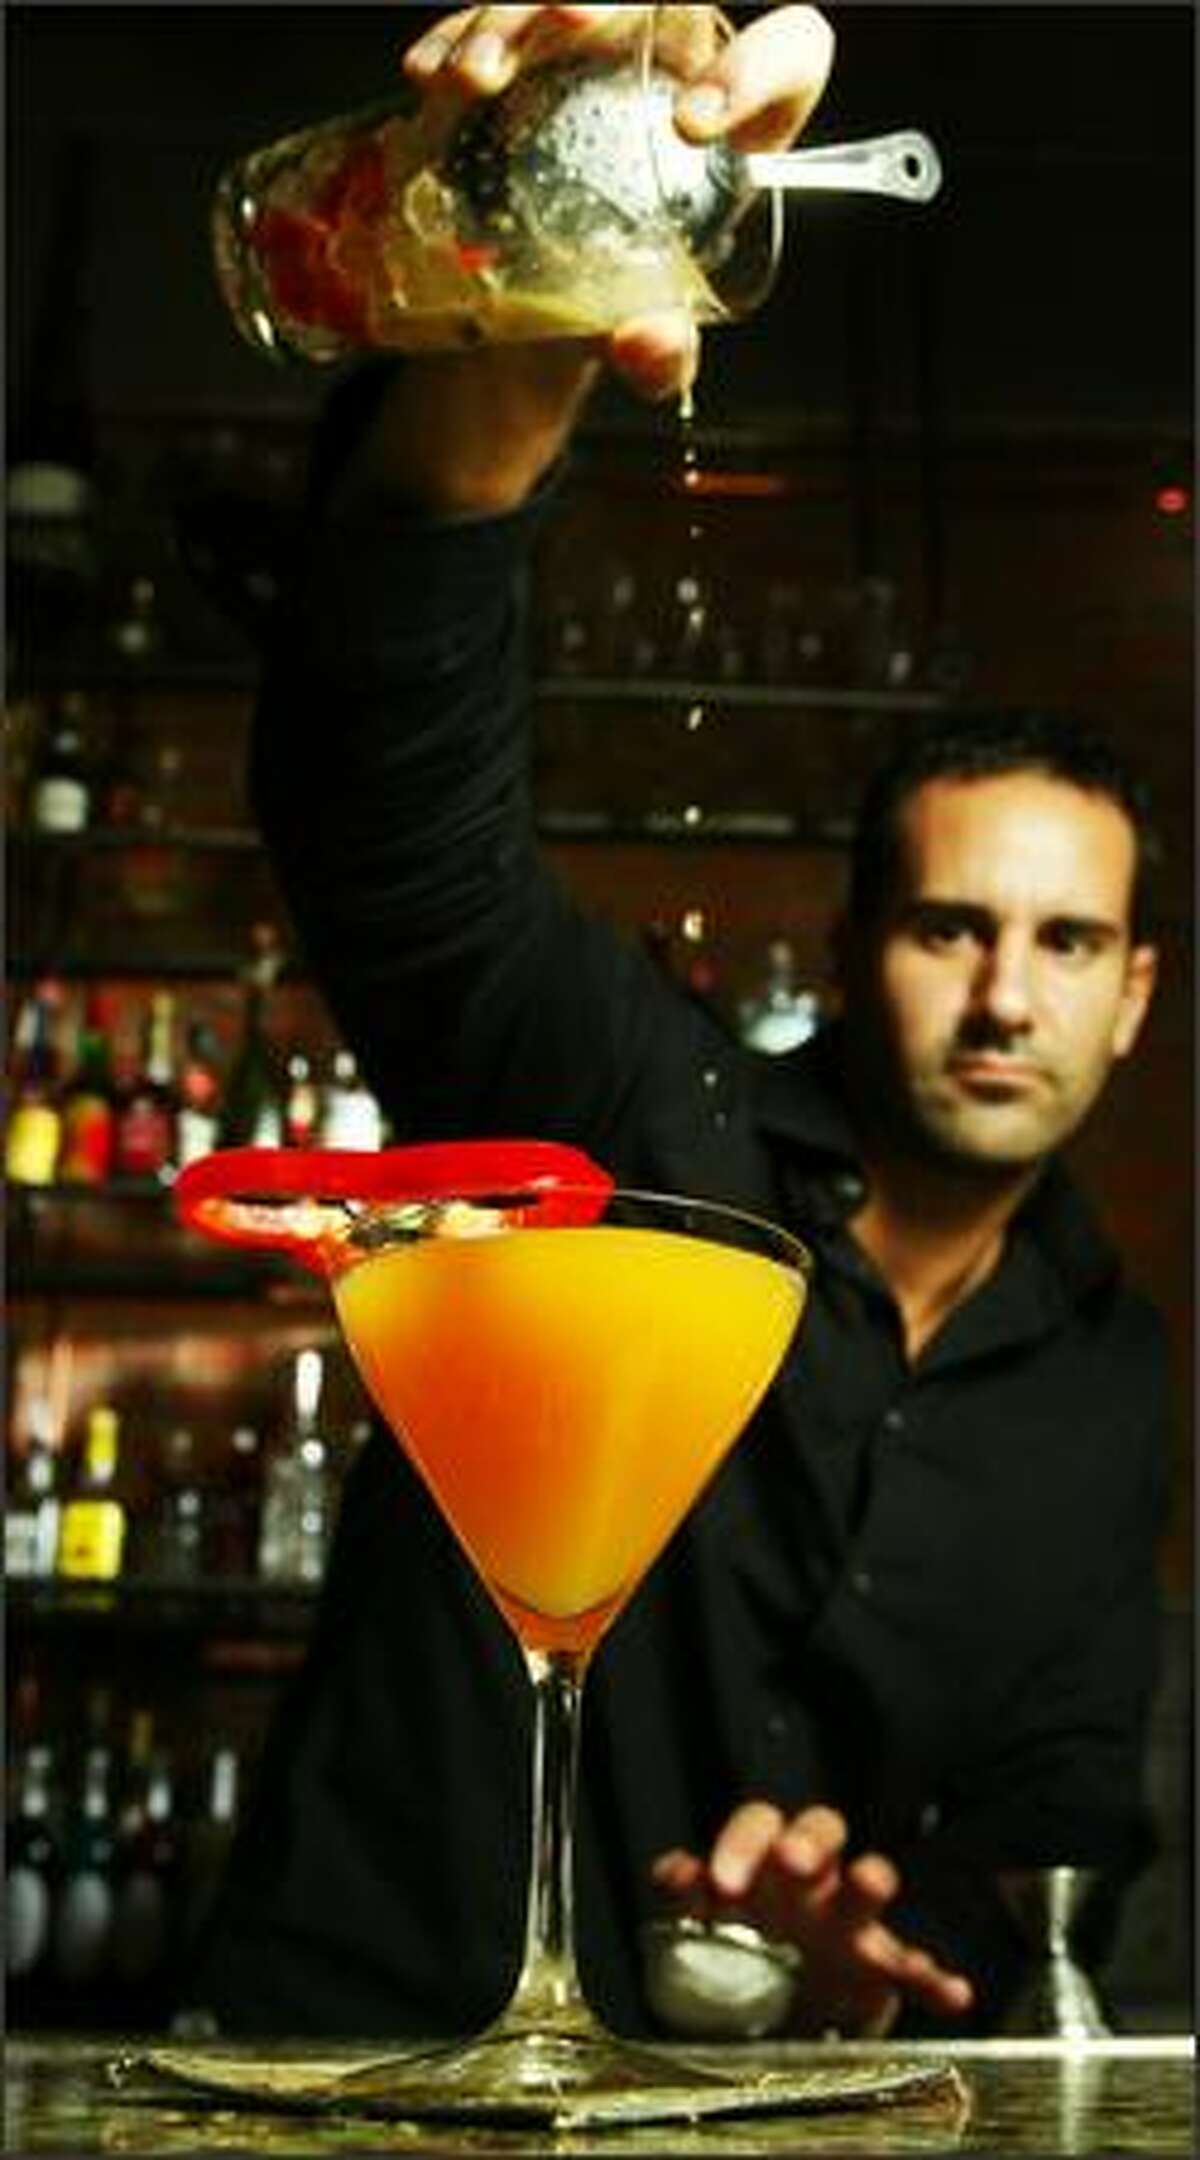 Mixologist Ryan Magarian, whose consulting company is called Liquid Kitchen, pours a cocktail at Kathy Casey Food Studios.